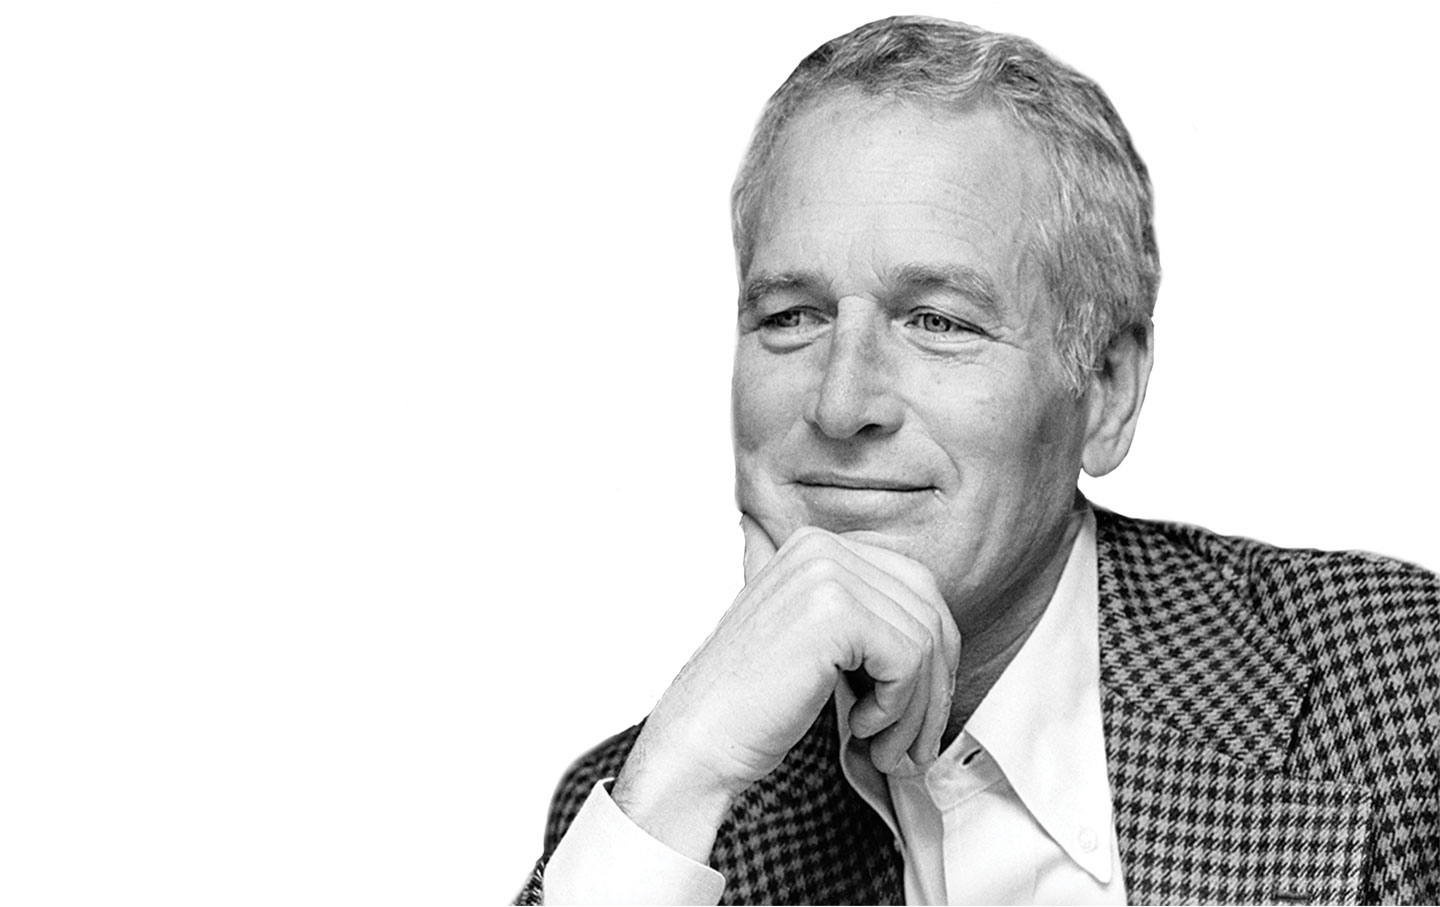 An Unpublished Poem by Paul Newman